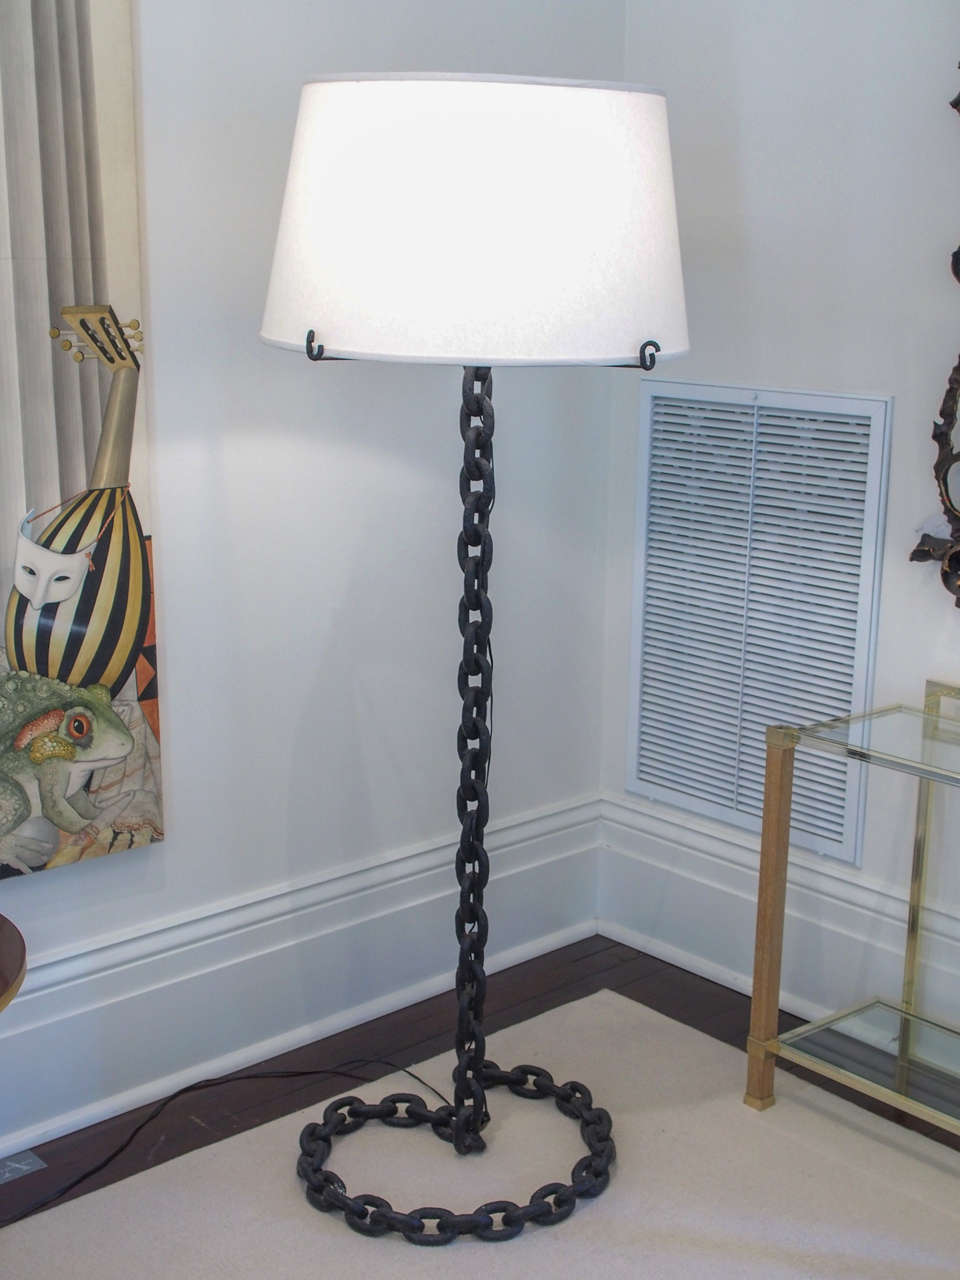 Unusual floor lamp in iron chain with three supports for the custom linen shade.